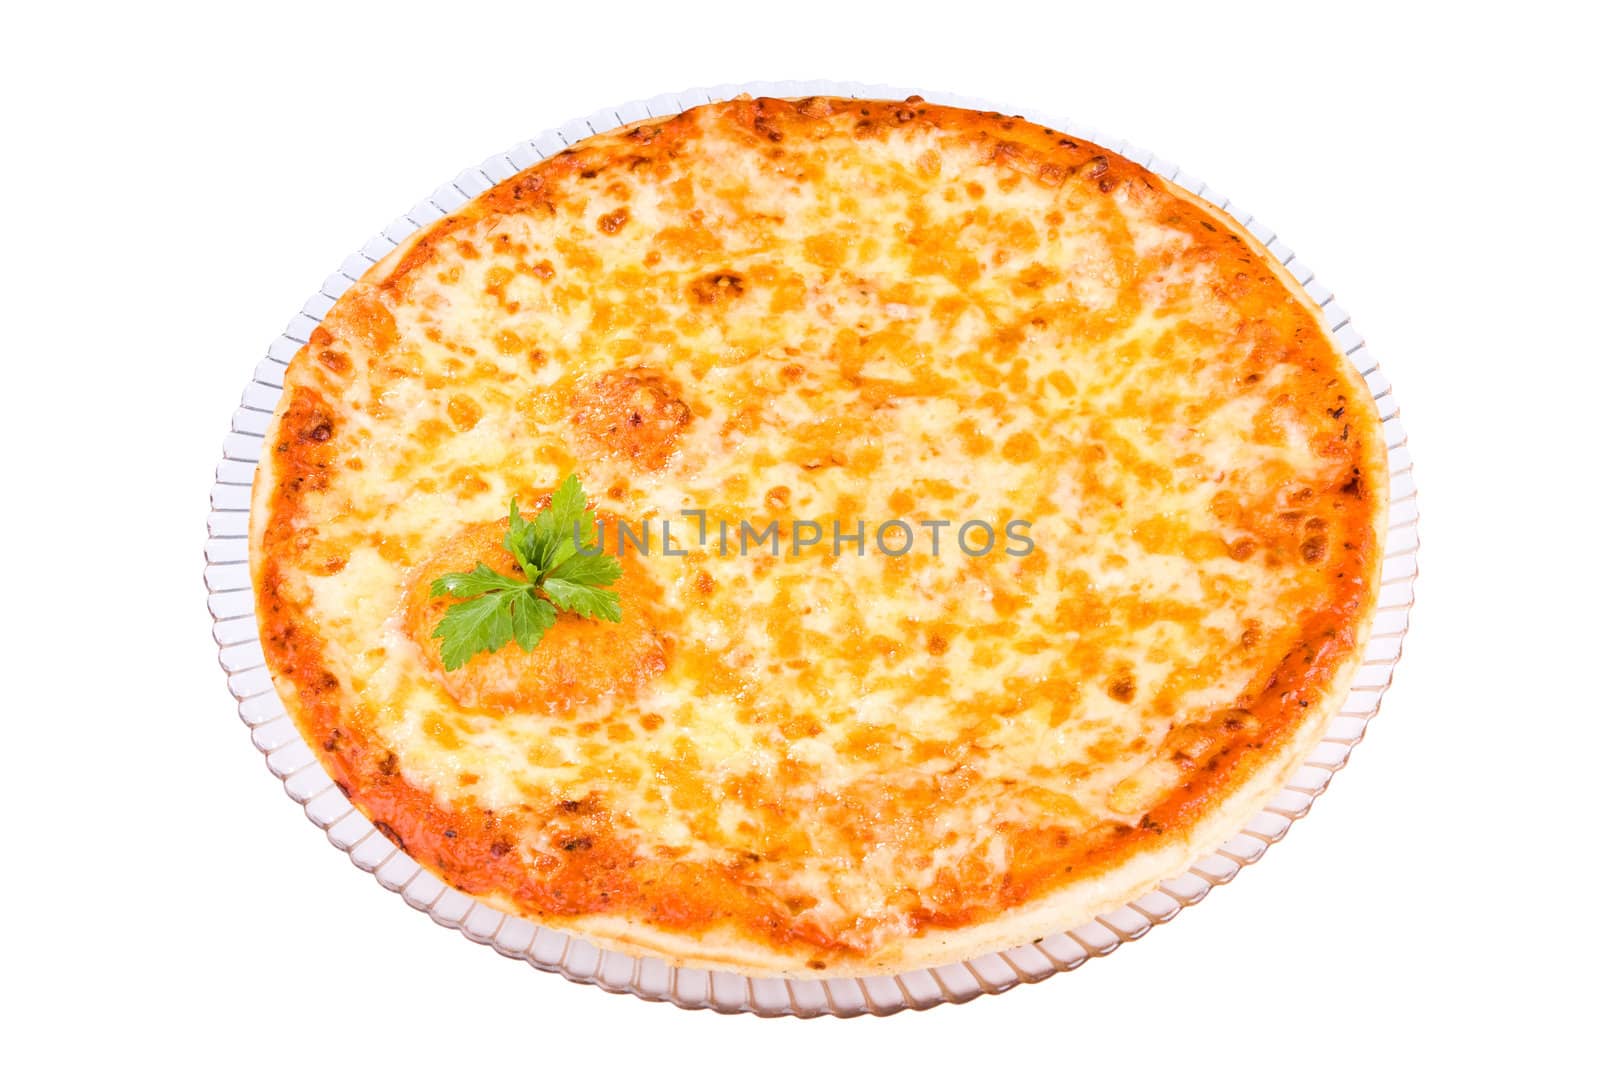 Four Cheeses Pizza by vsurkov